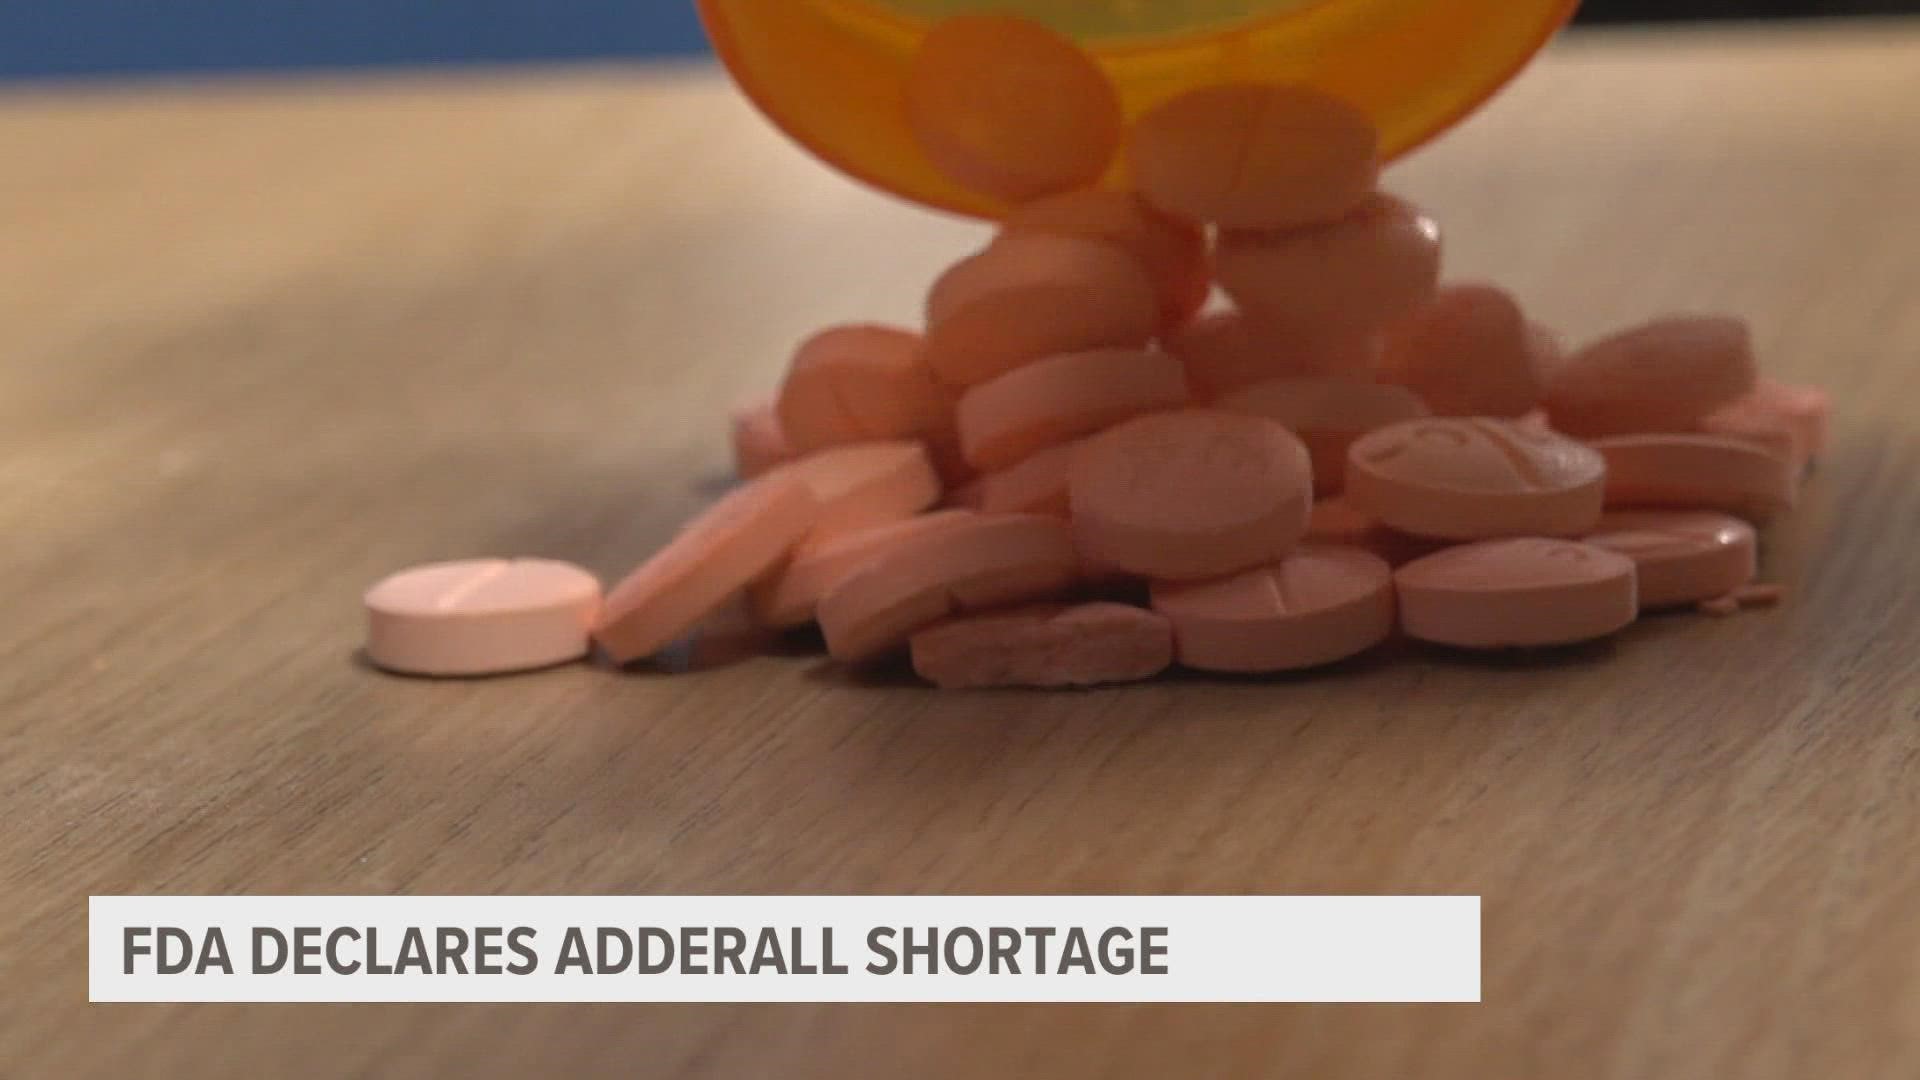 The FDA declared a shortage on Adderall medication. Production recovery times vary.